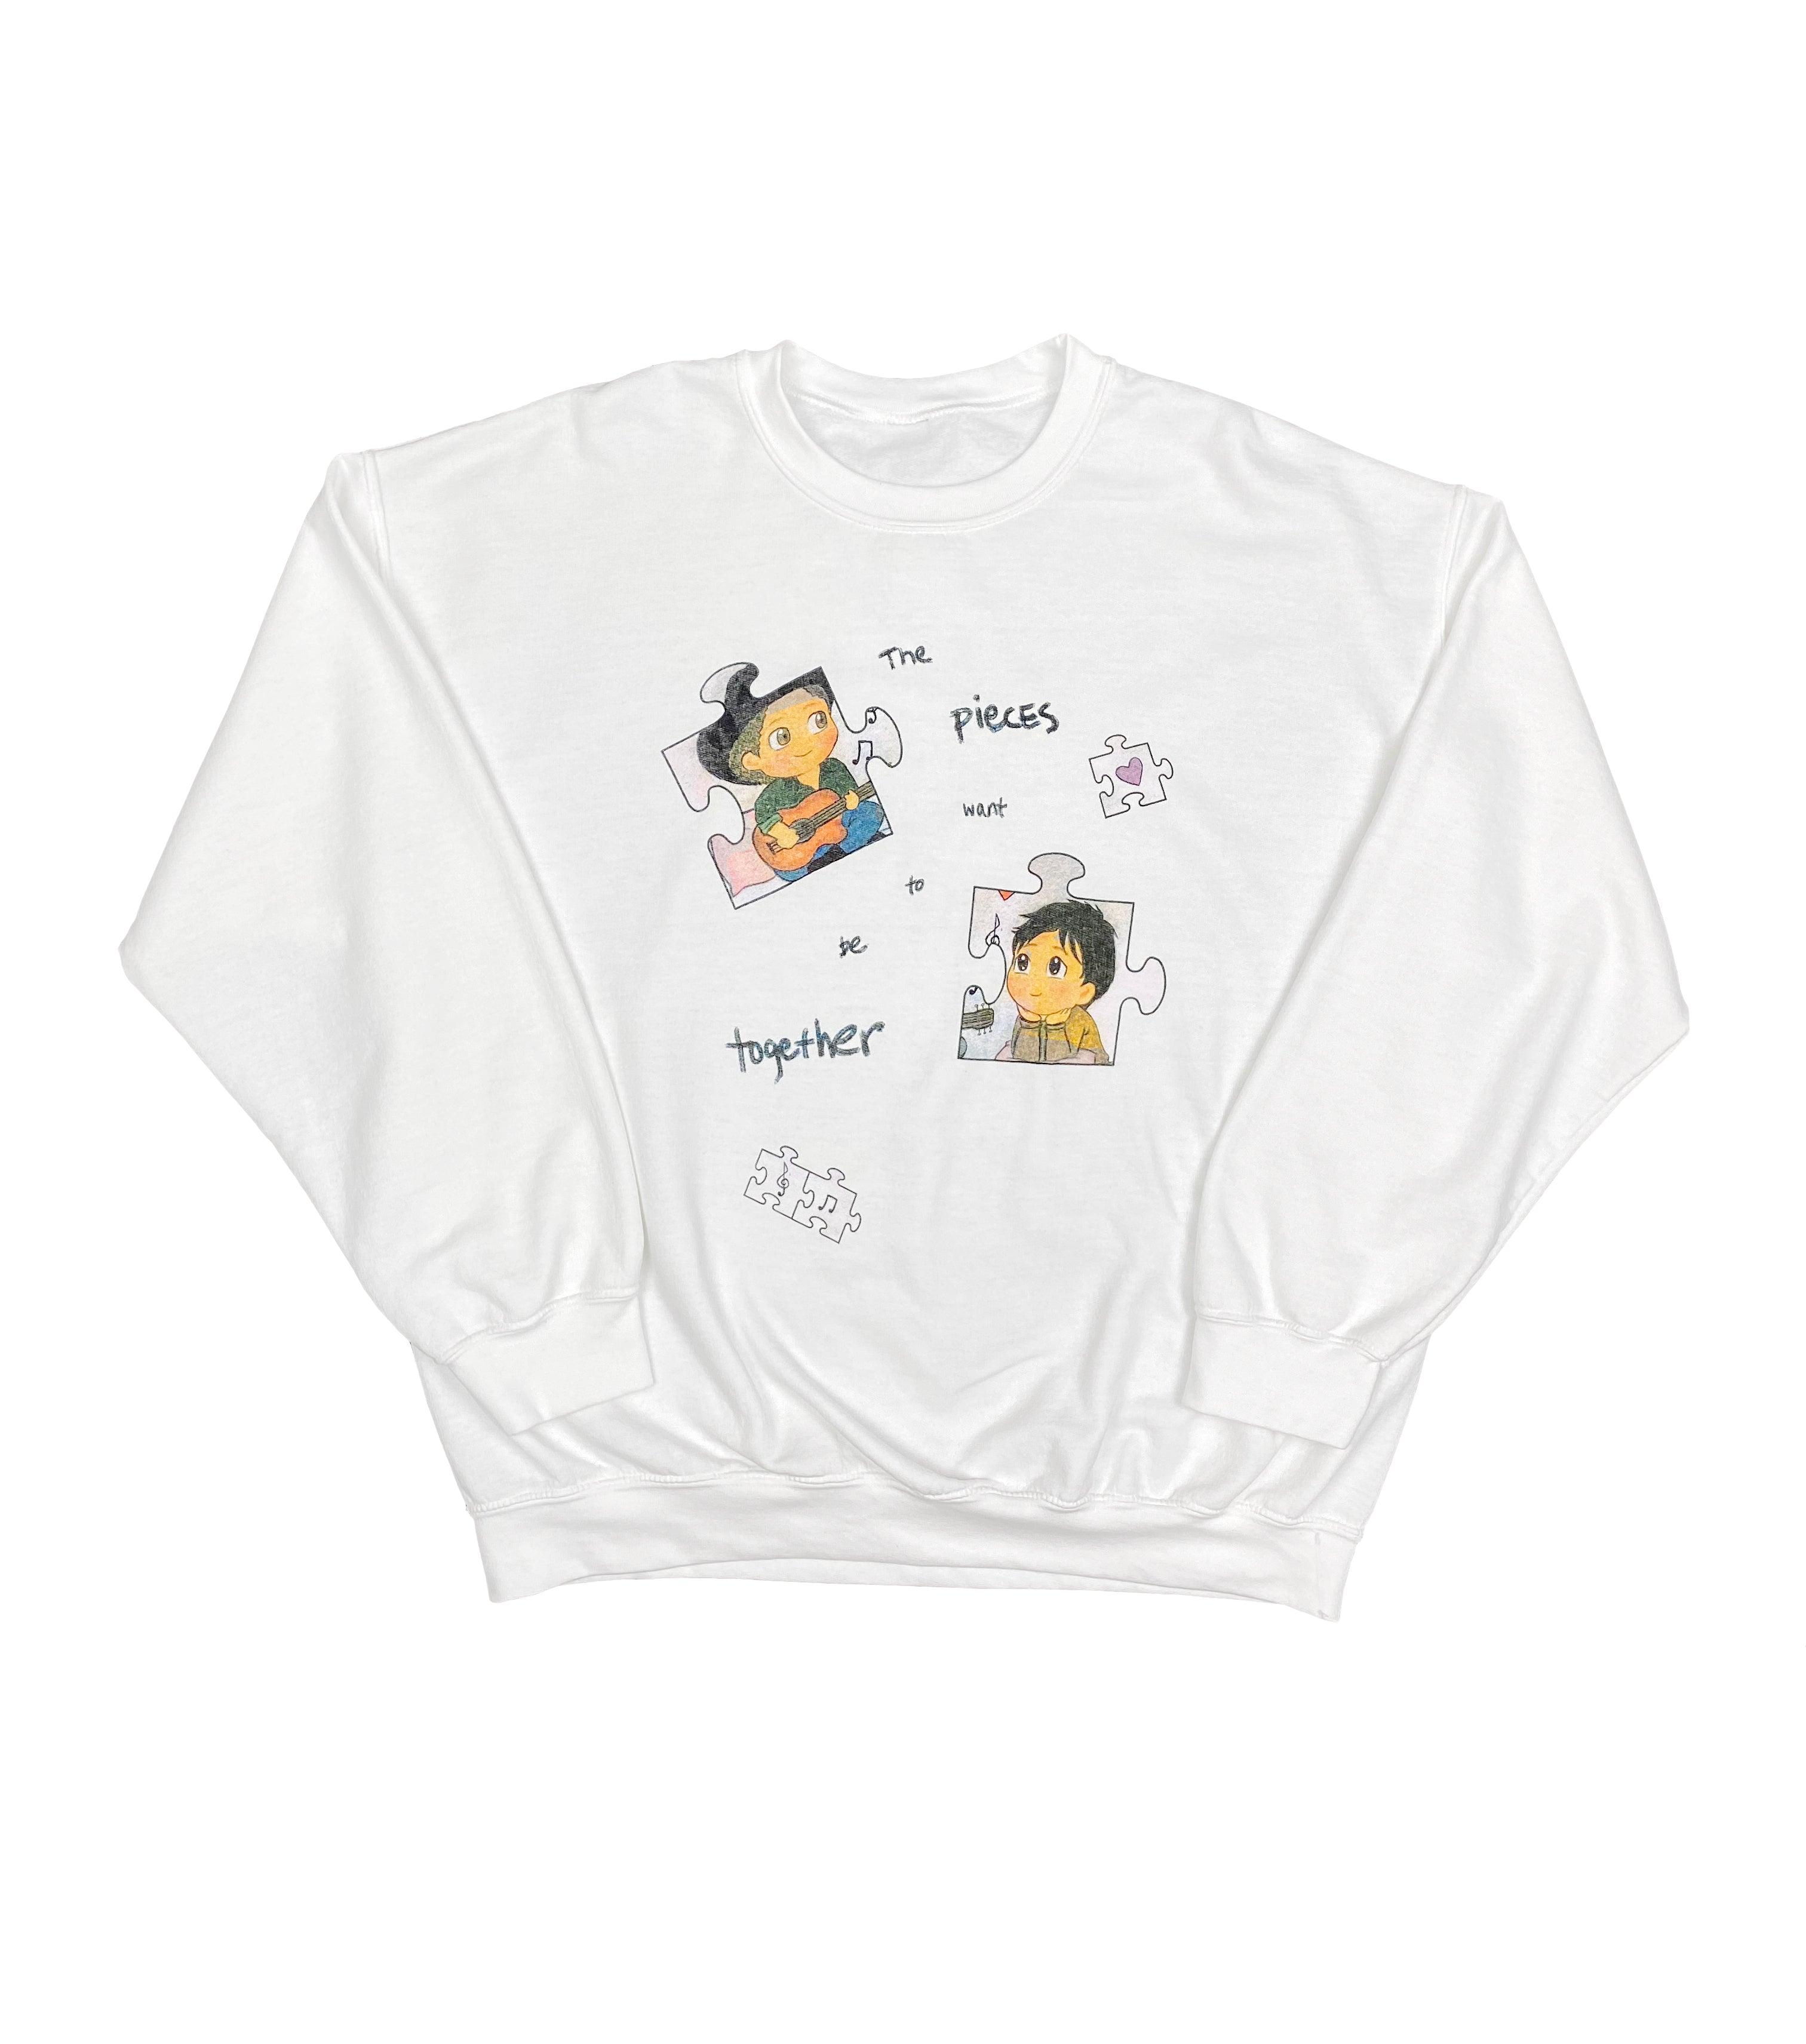 THE PIECES WANT TO BE TOGETHER CREW NECK SWEATSHIRT WHITE